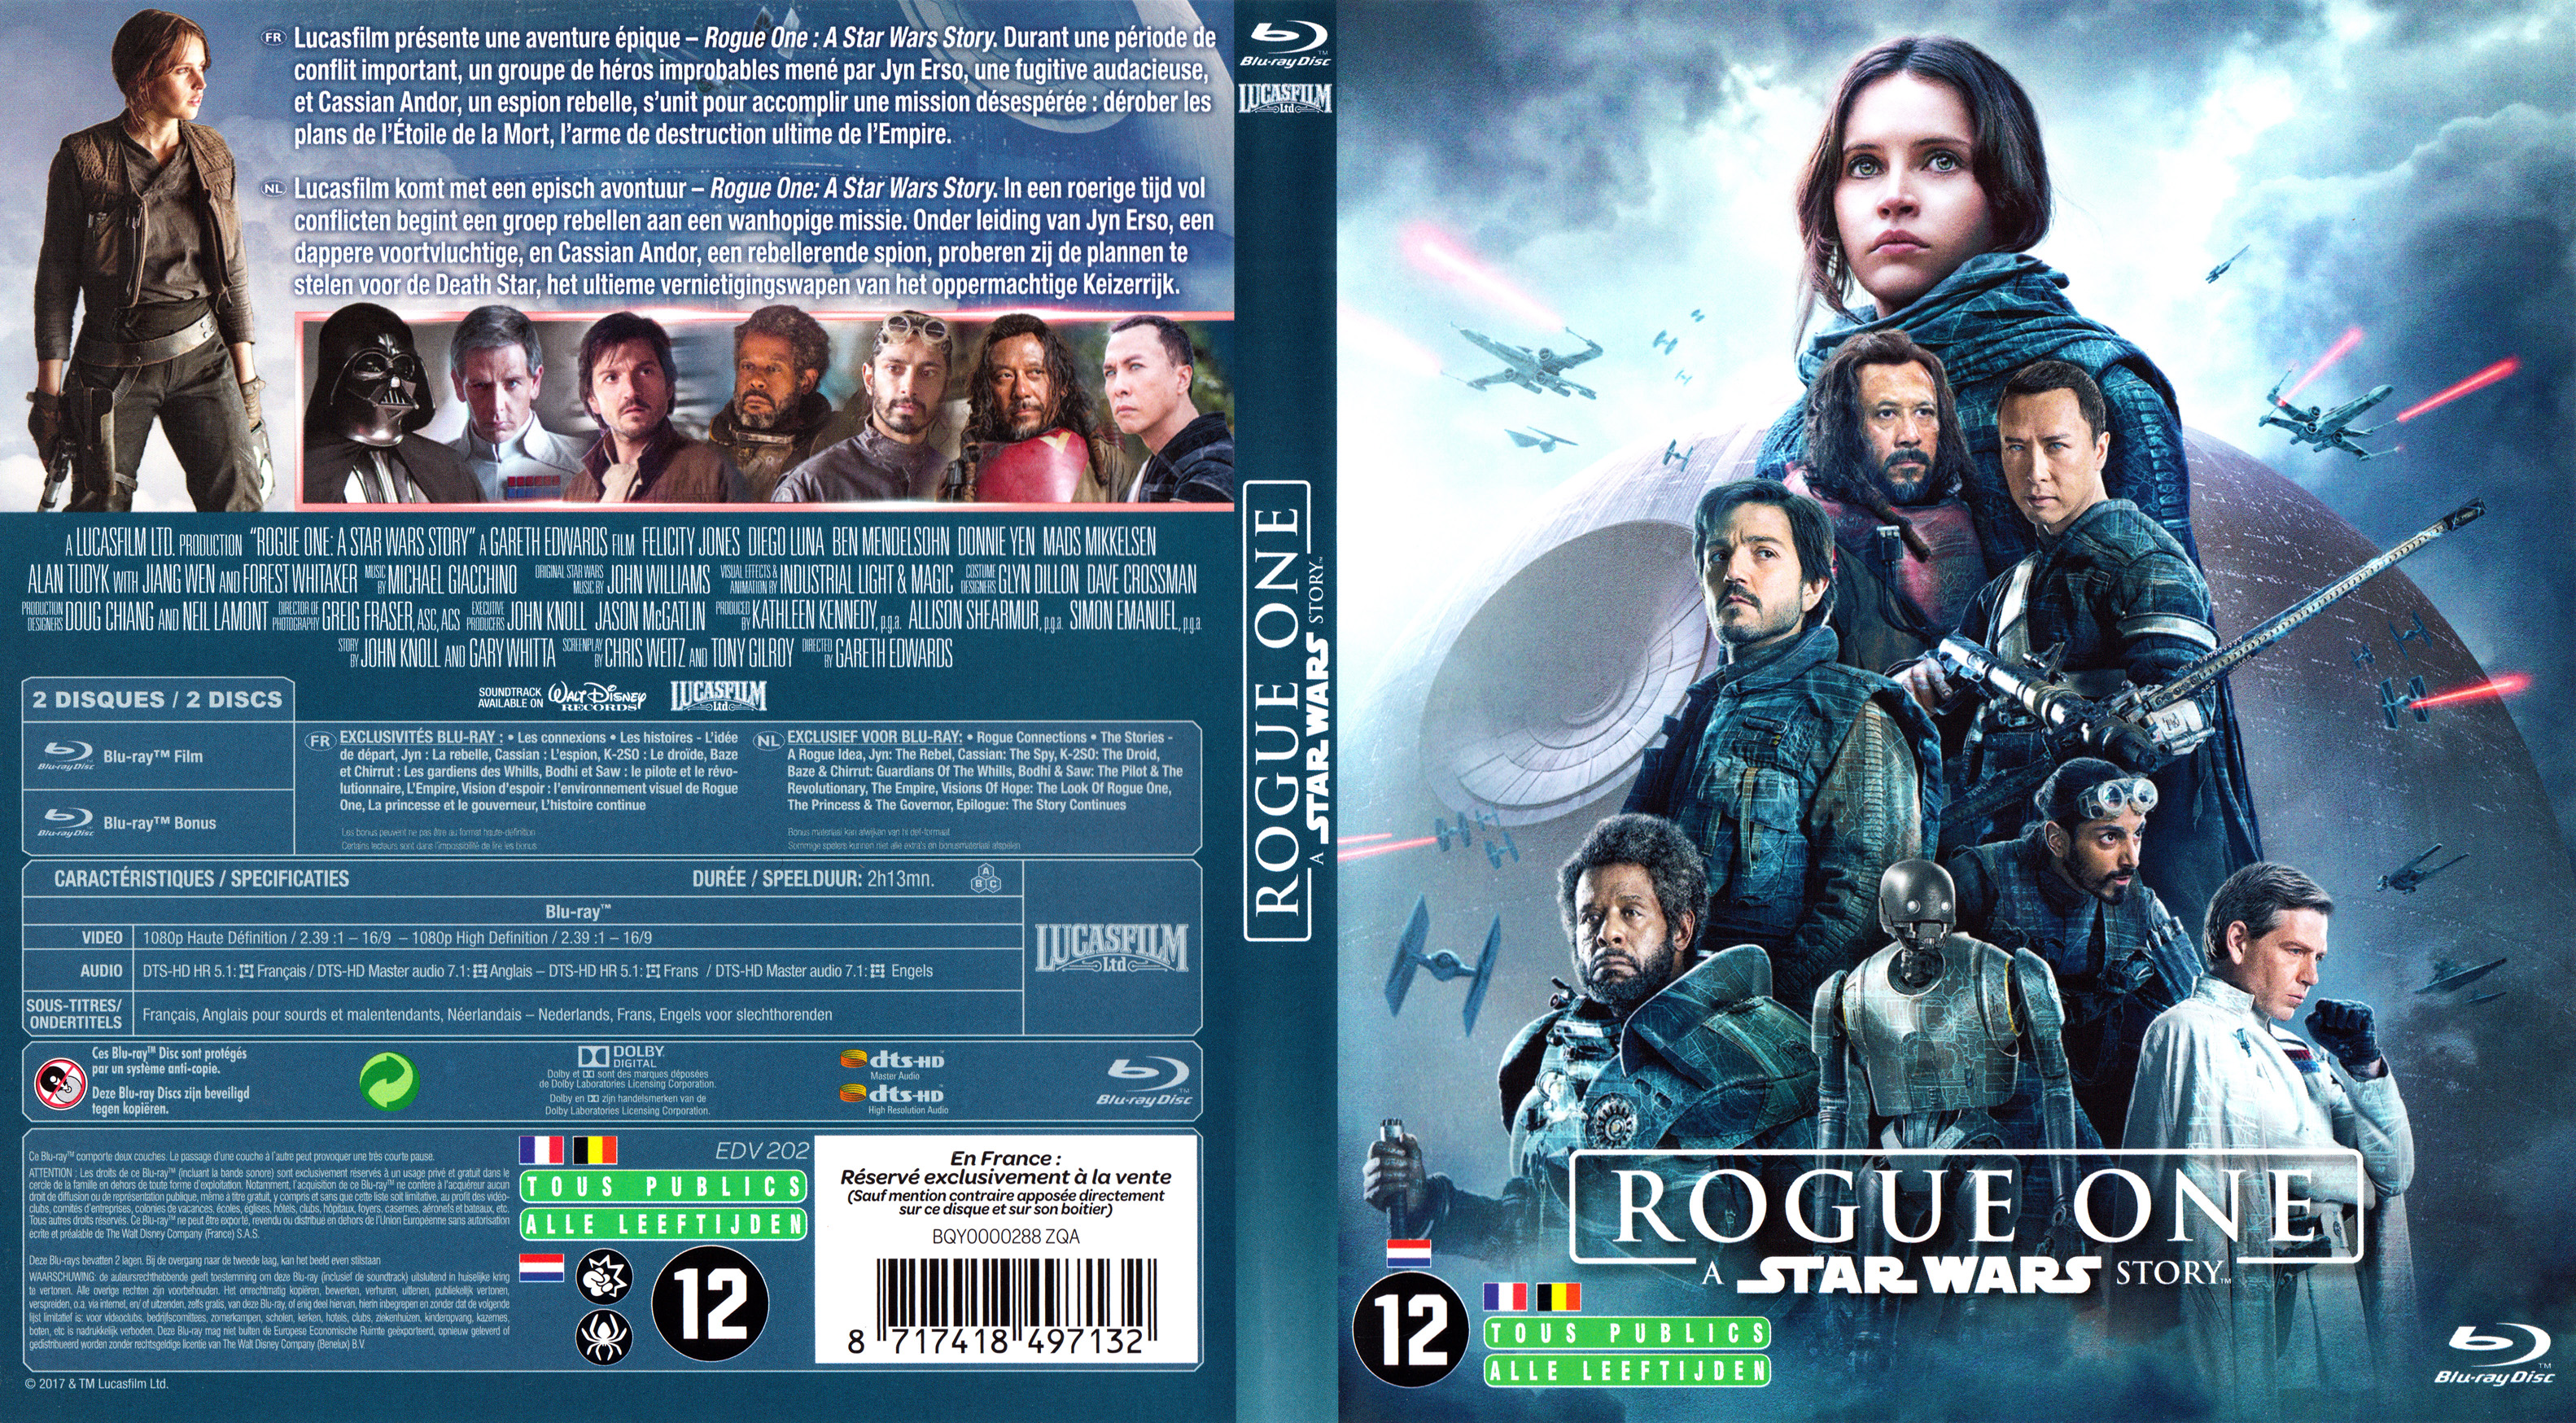 Jaquette DVD Rogue One: A Star Wars Story (BLU-RAY)